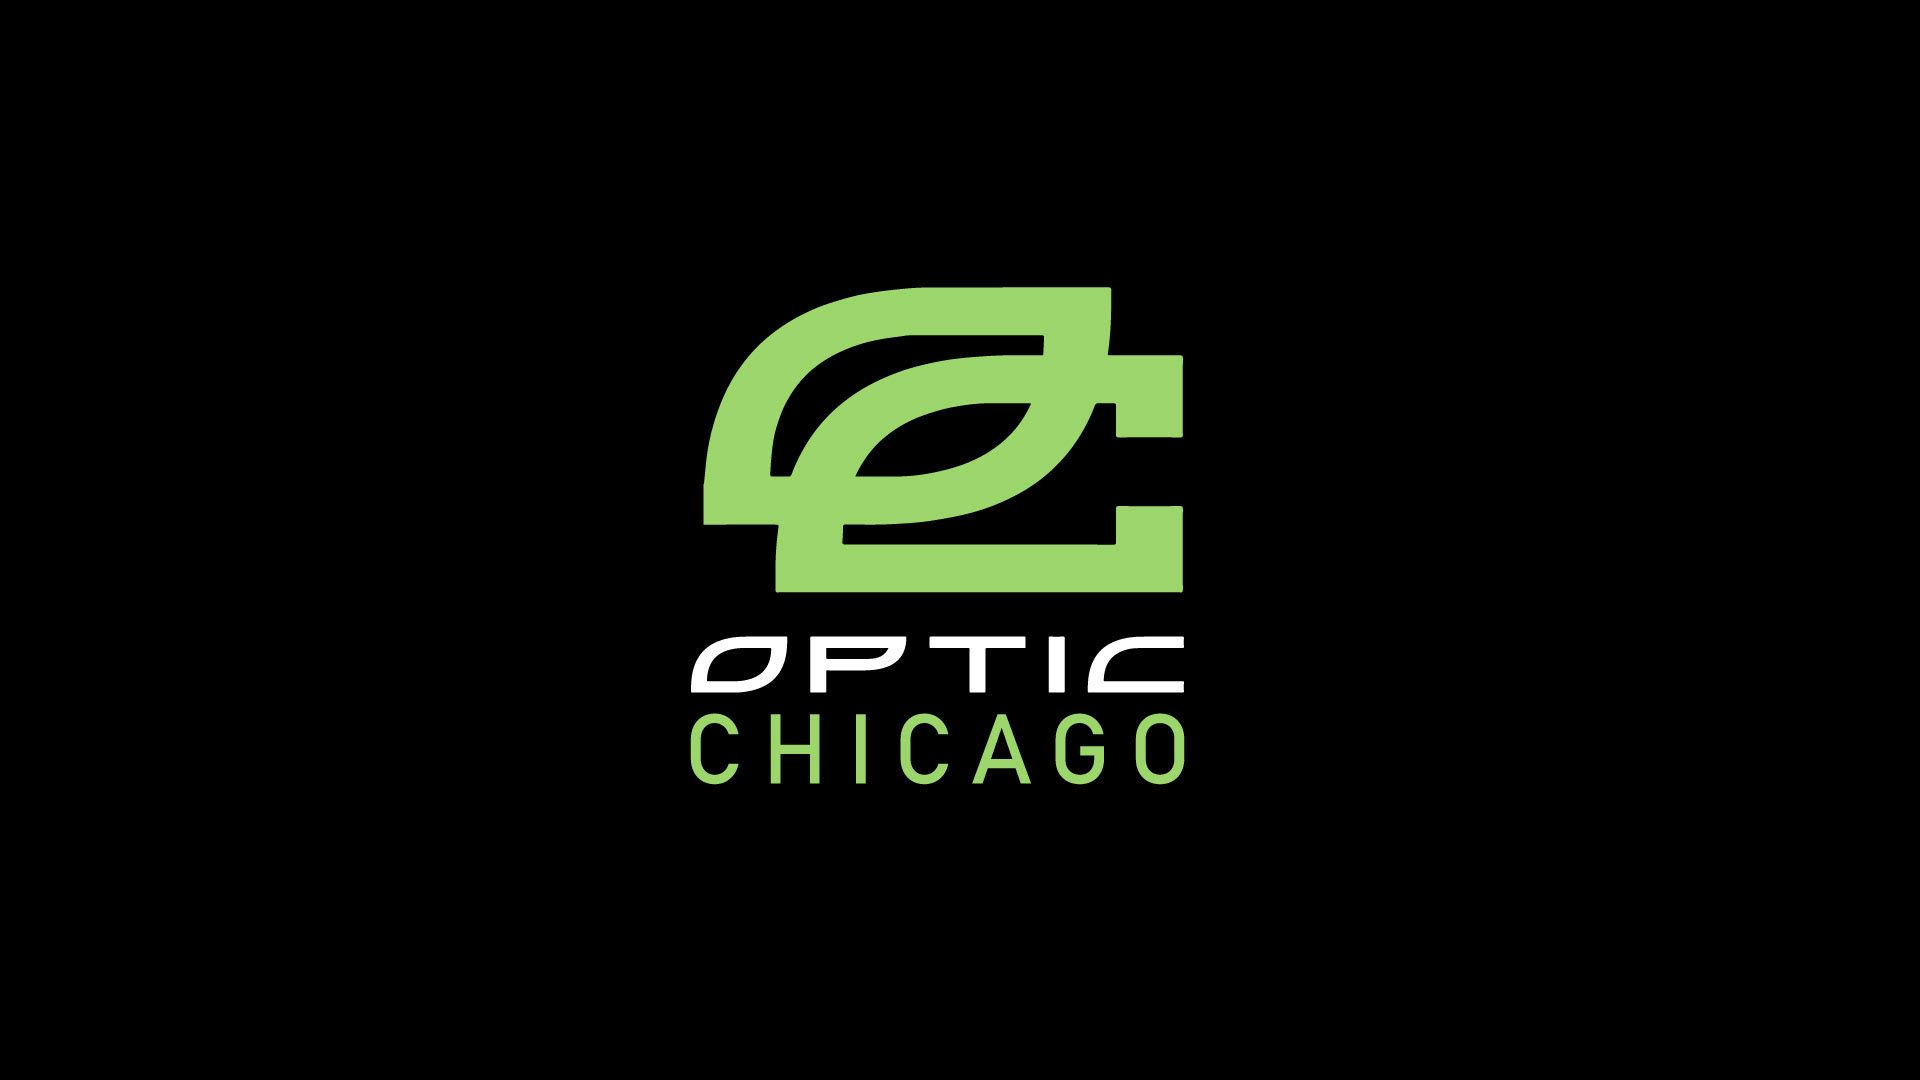 OpTic Chicago projects. Photo, videos, logos, illustrations and branding